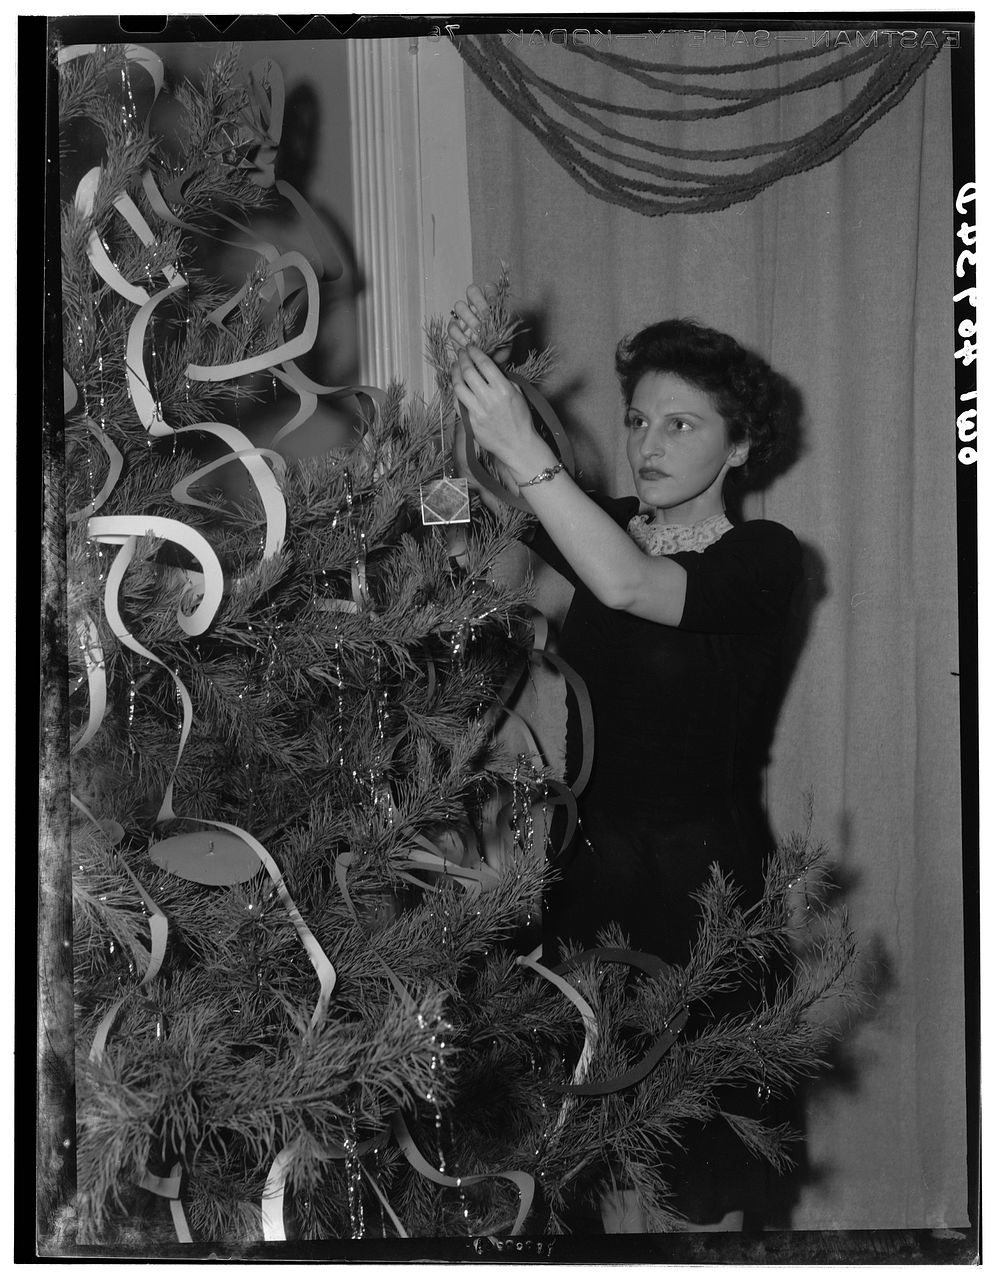 Washington, D.C. Decorating the tree at a Christmas Eve party given by Local 203 of the United Federal Workers of America…